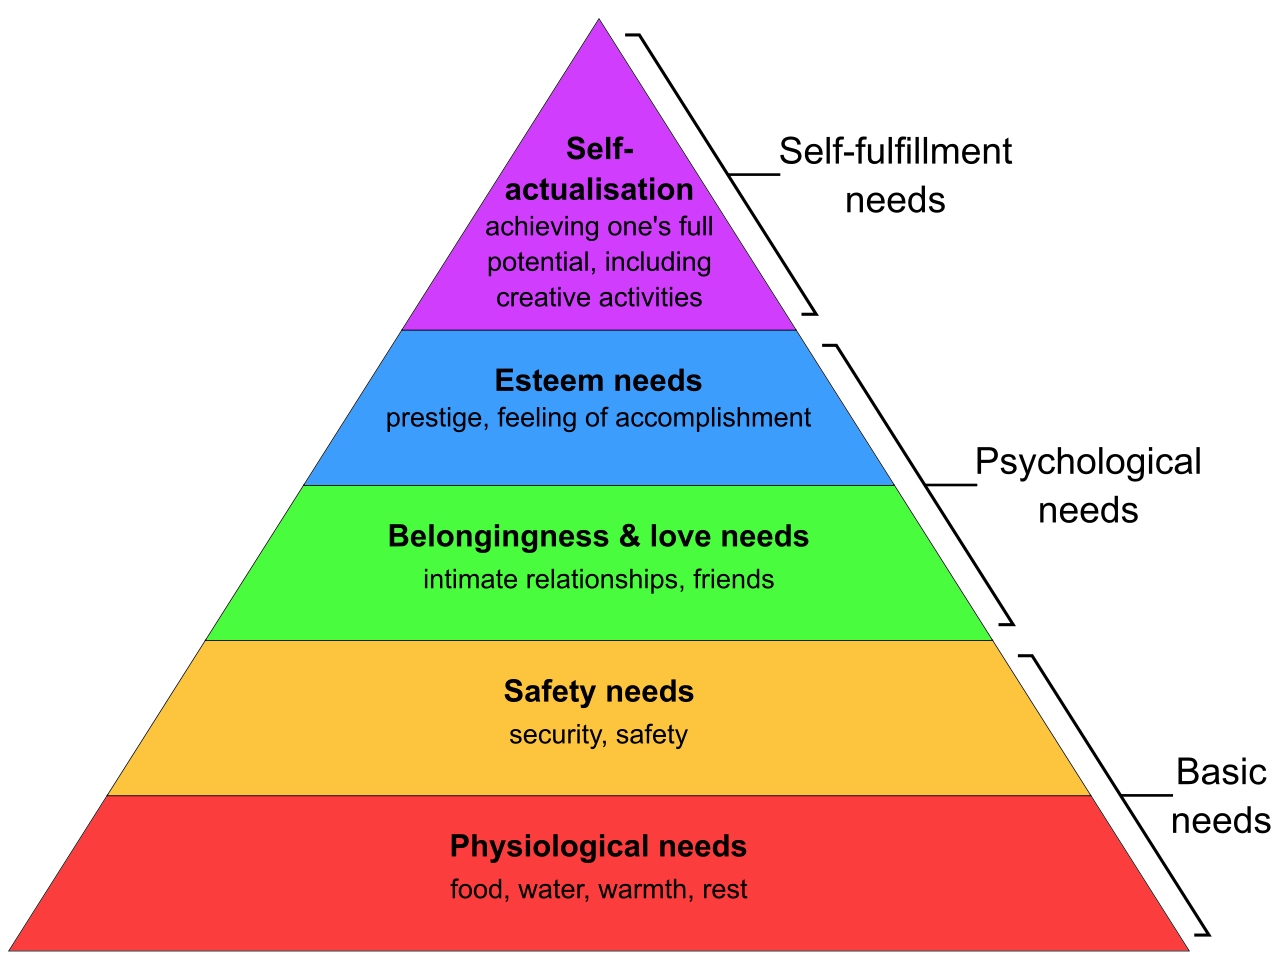 Maslow's Hierarchy of needs visualized